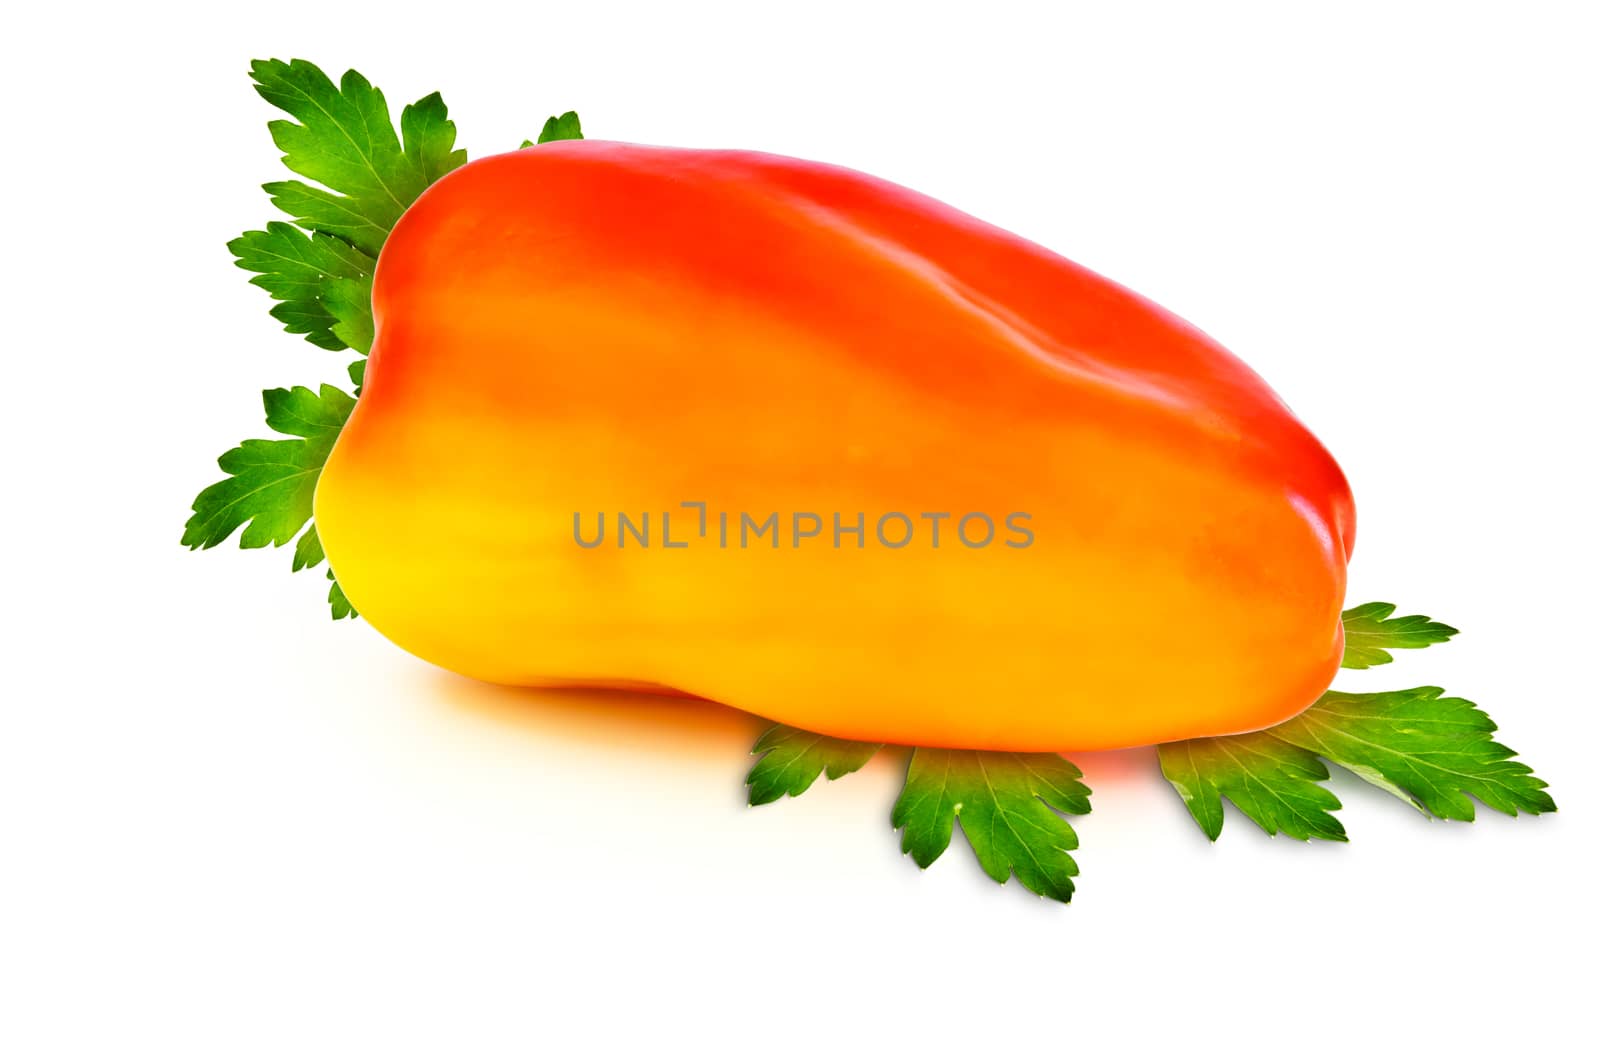 Juicy red and yellow sweet pepper and green parsley leaves on white background